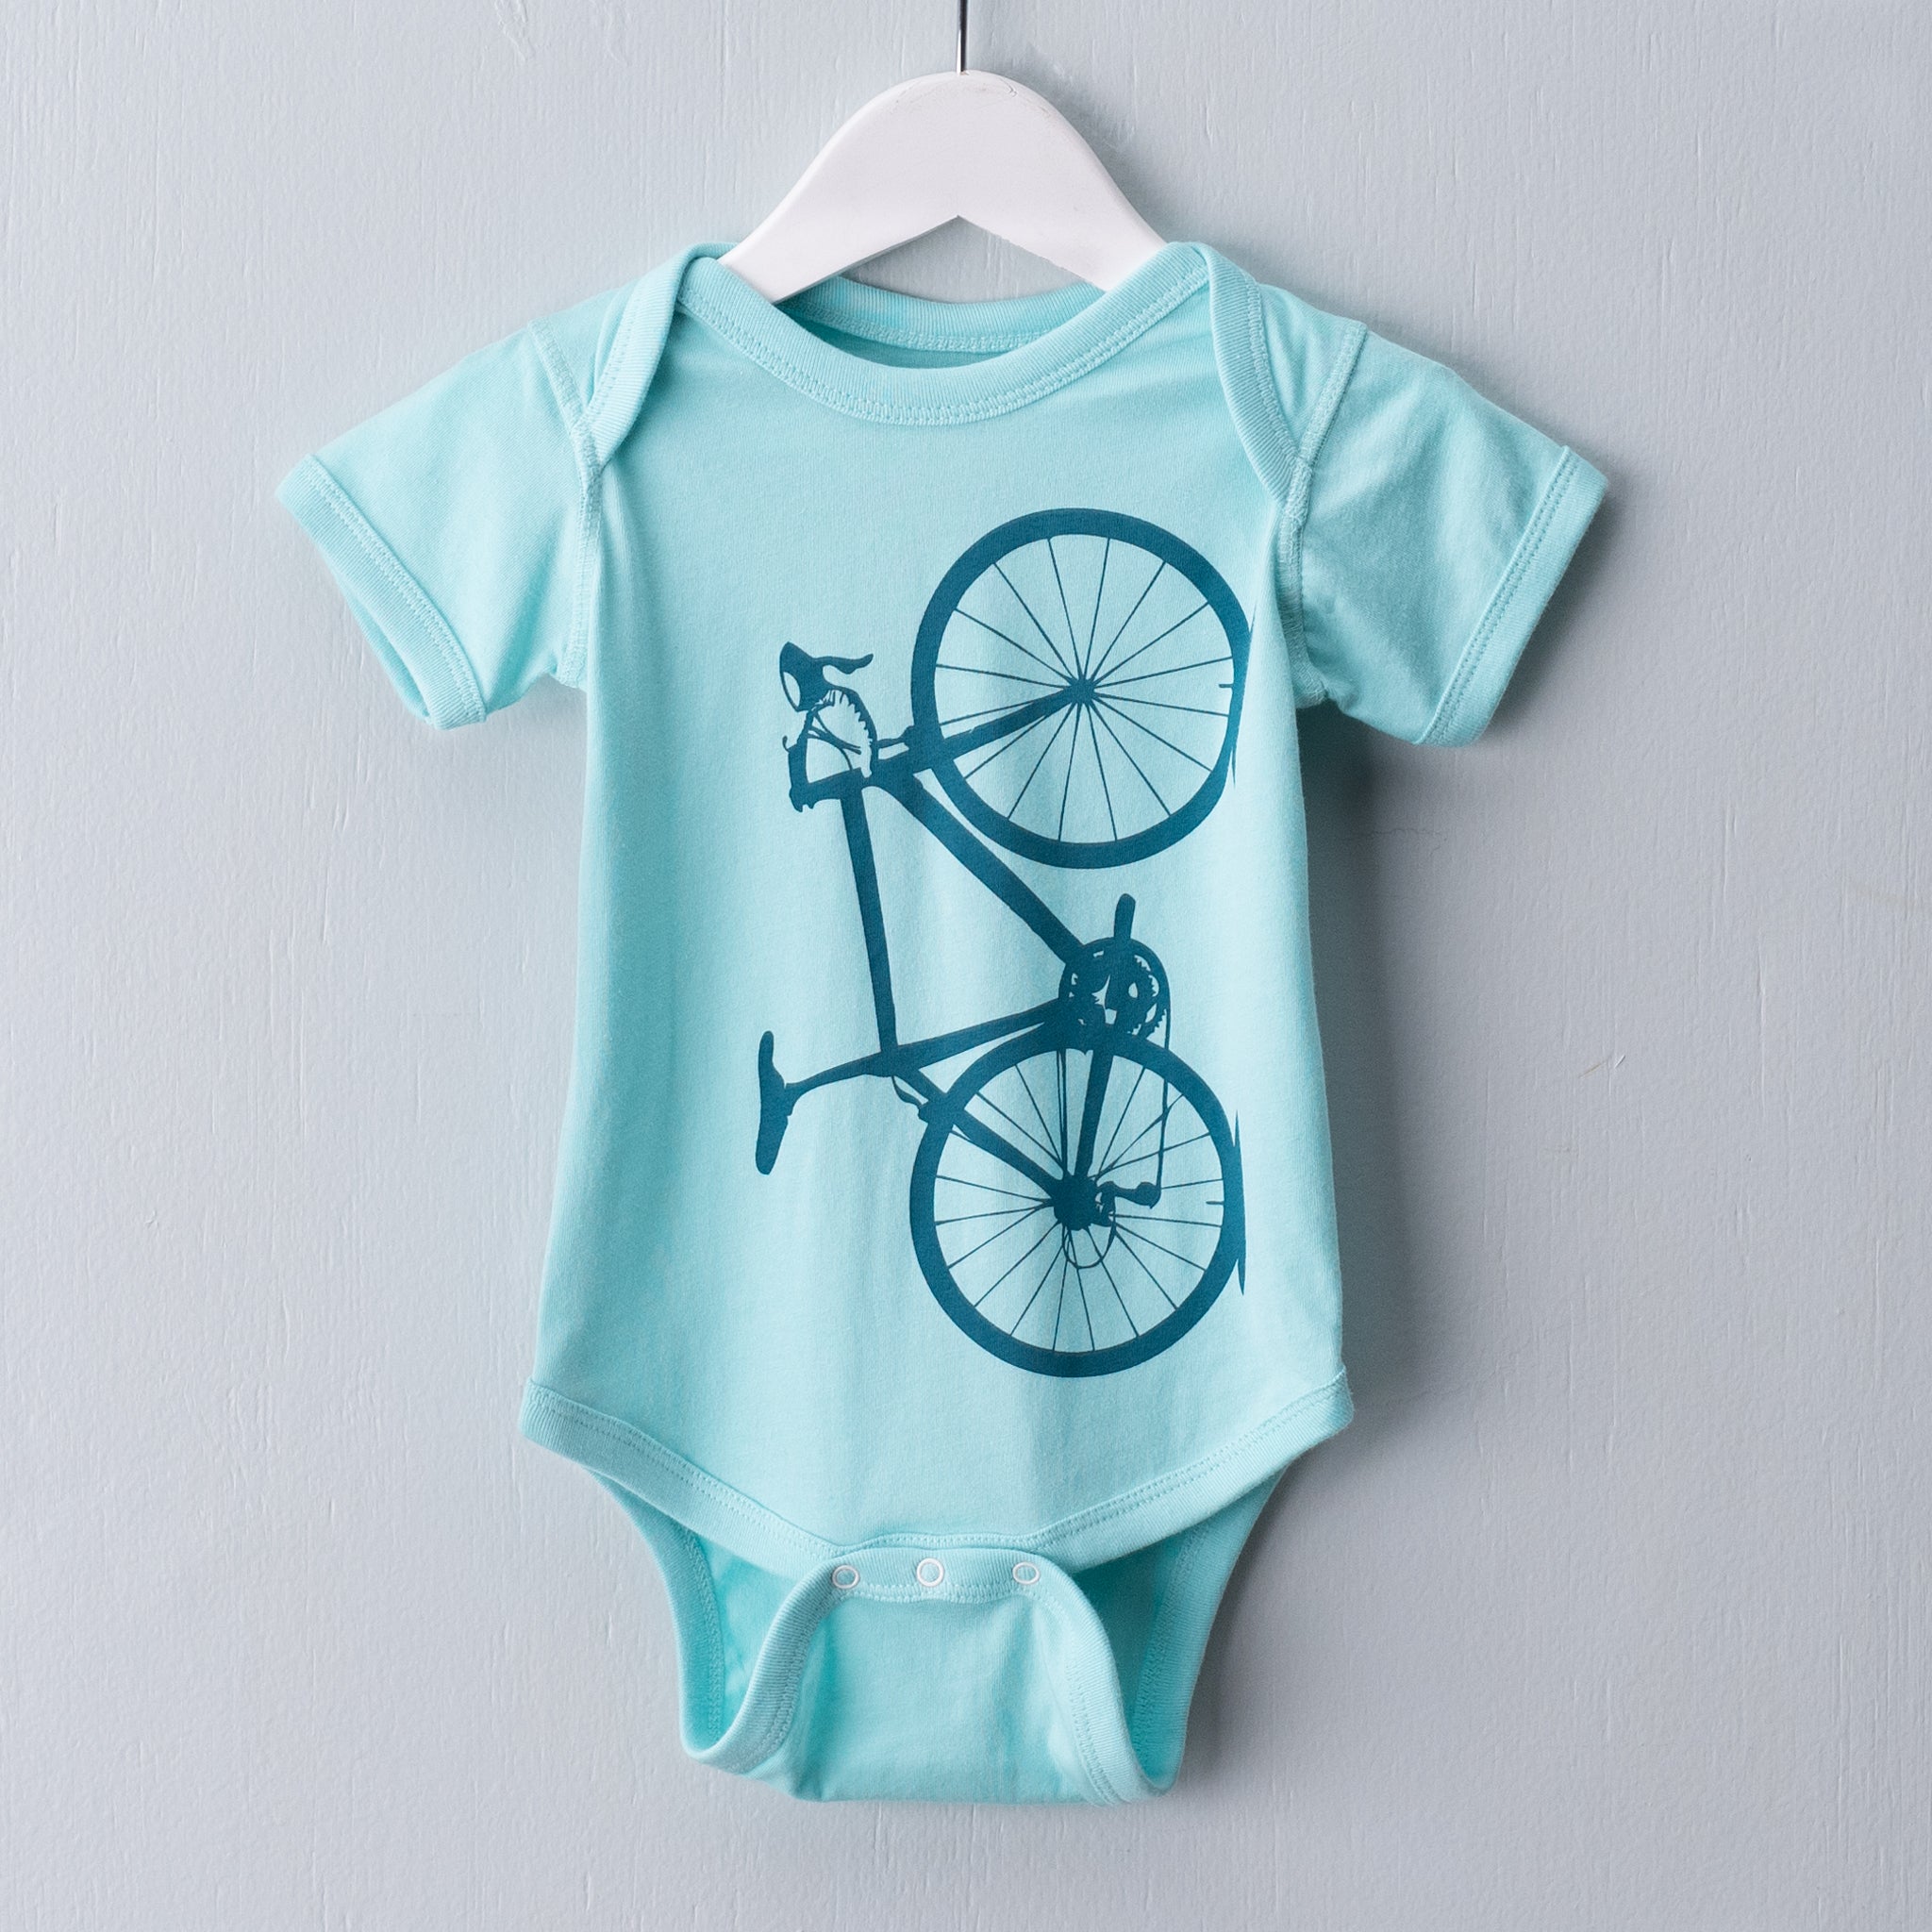 Chill blue infant one piece garment screen printed with a teal blue bicycle